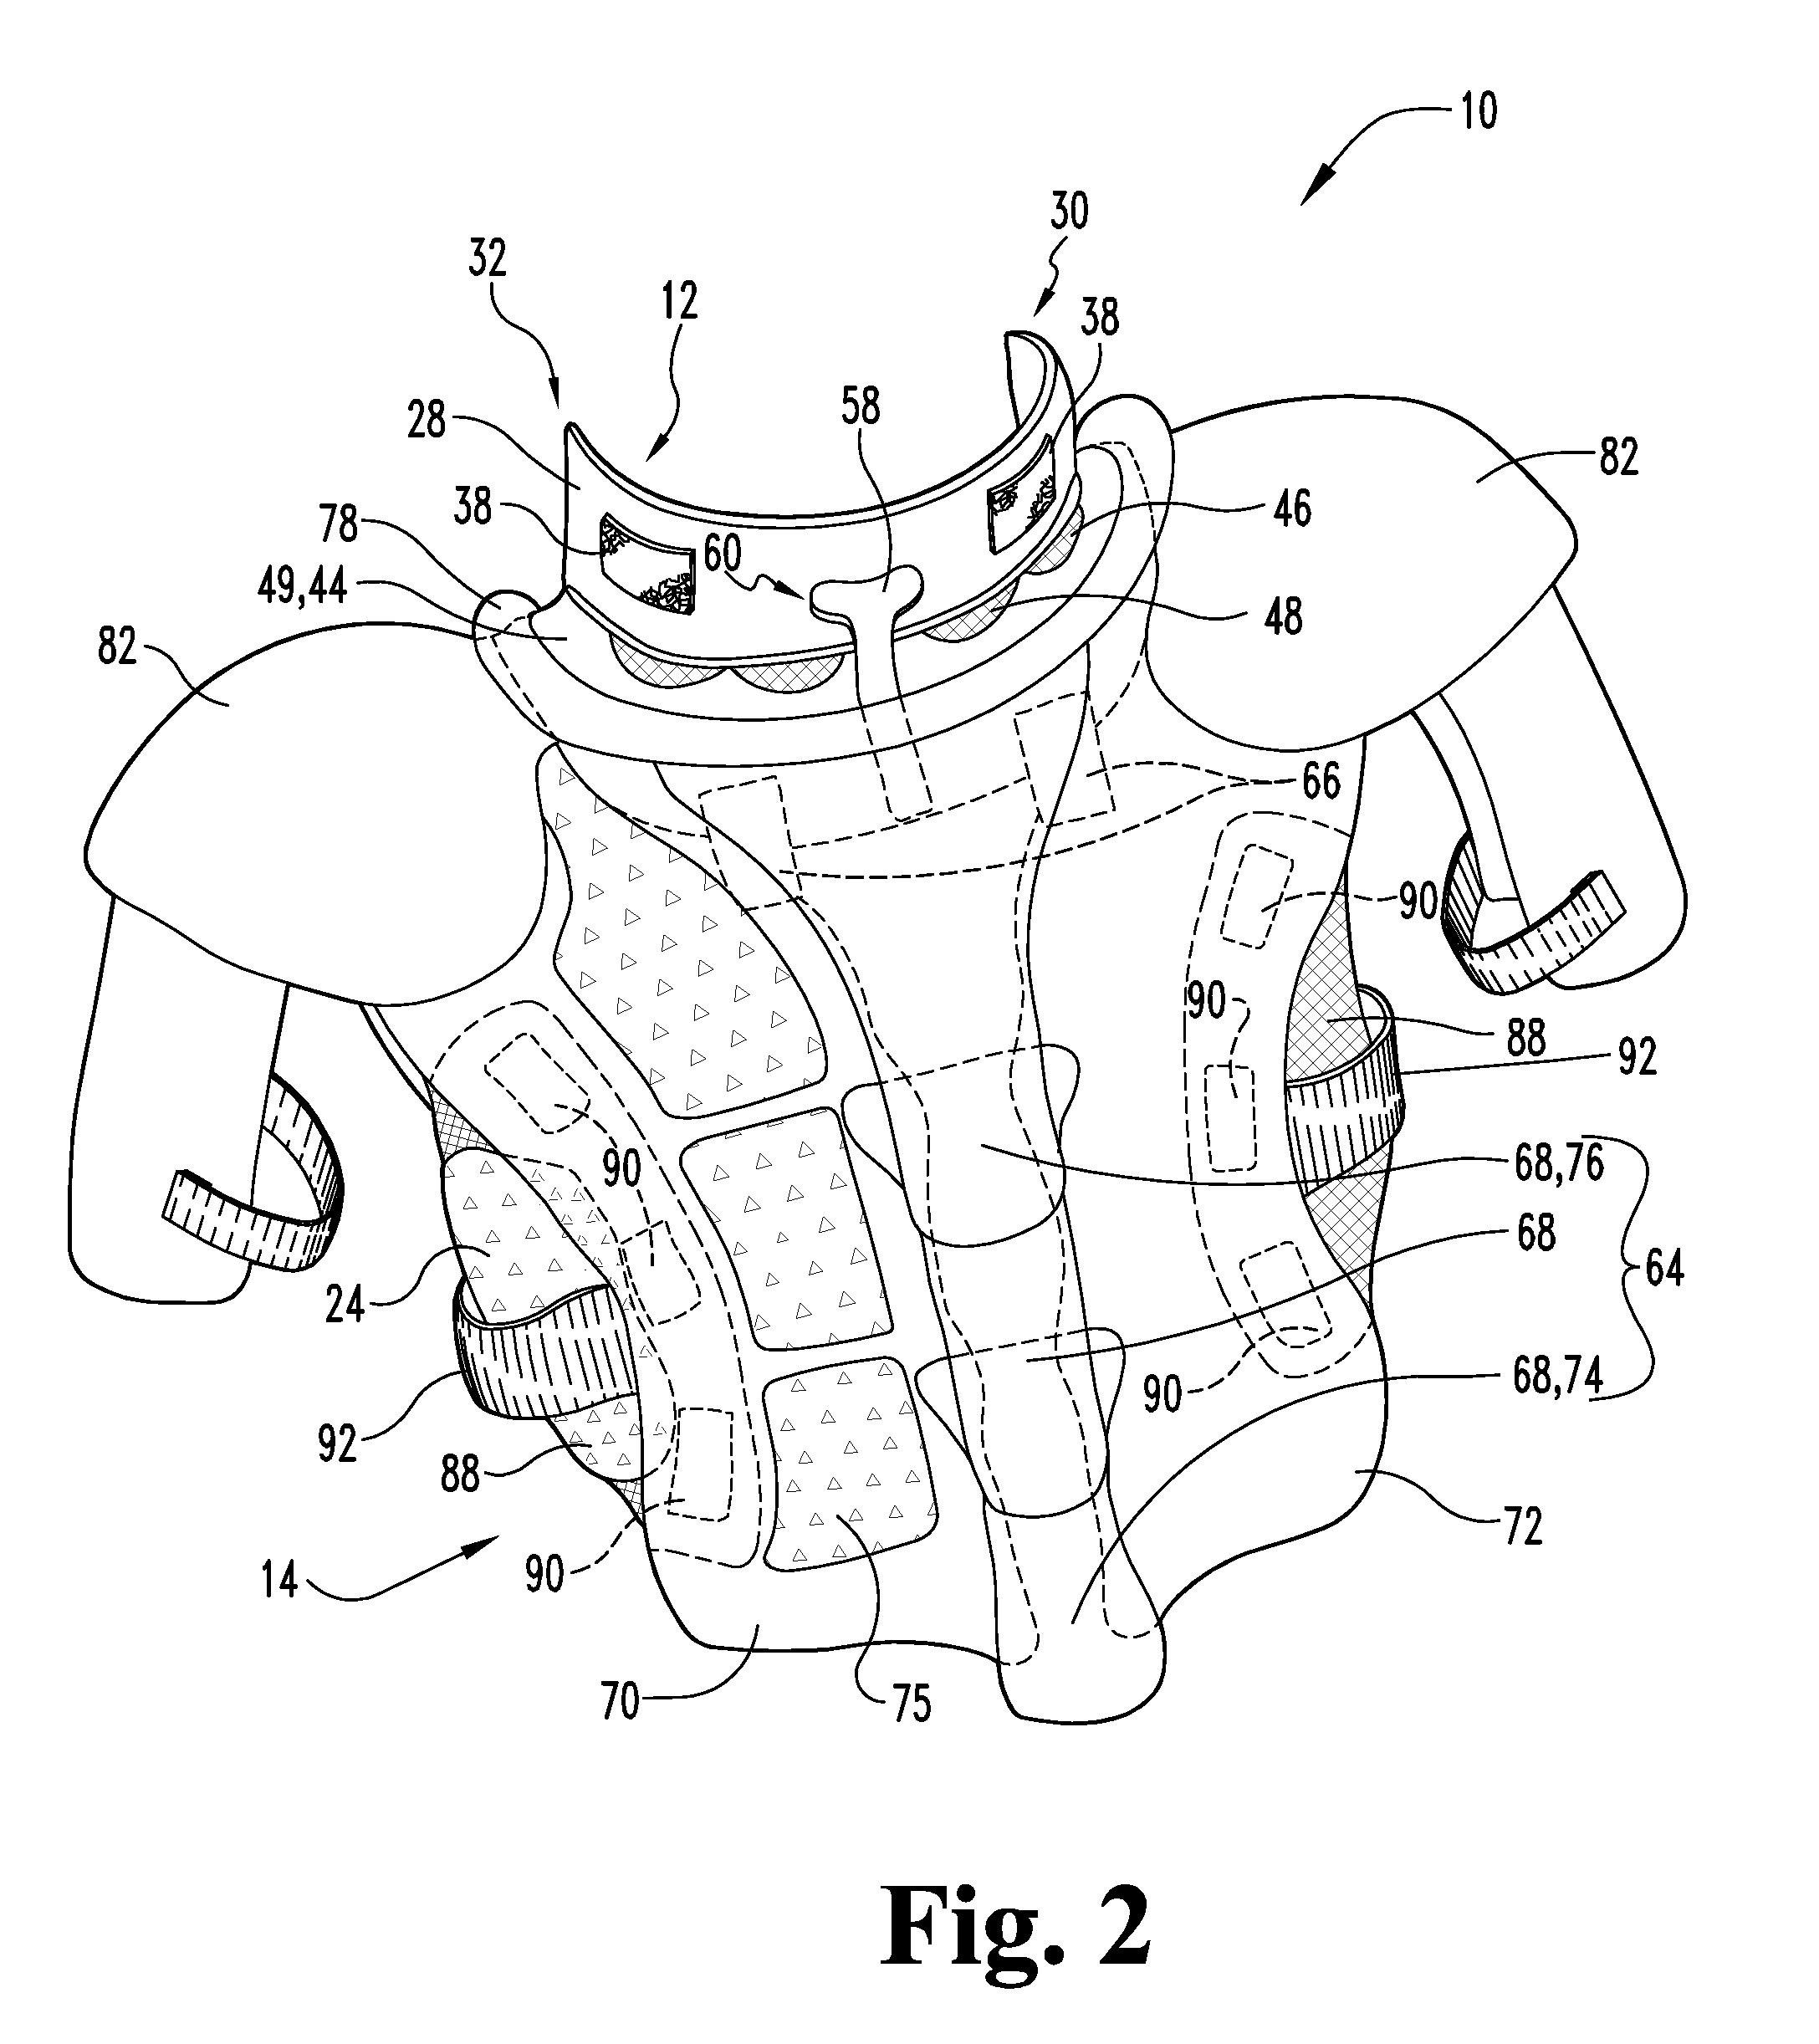 Combined neck and upper body protective garment